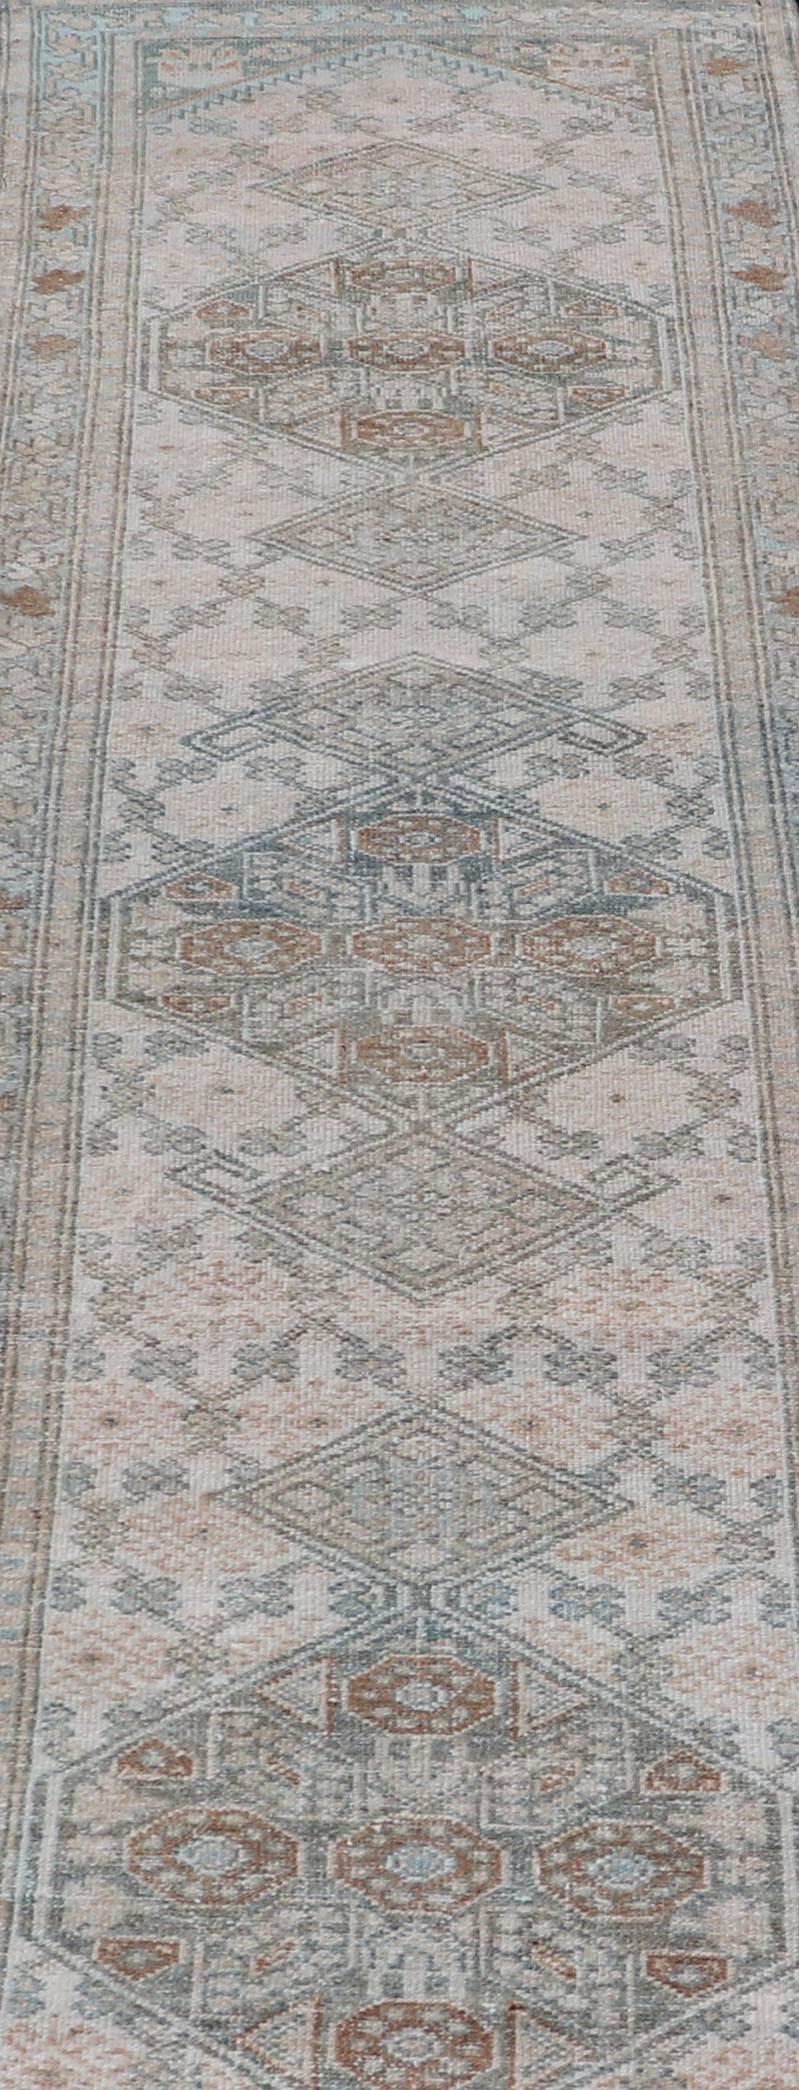 Wool Antique Persian Sarab Runner with Sub-Geometric Design in Light Blue, Tan, Grey For Sale